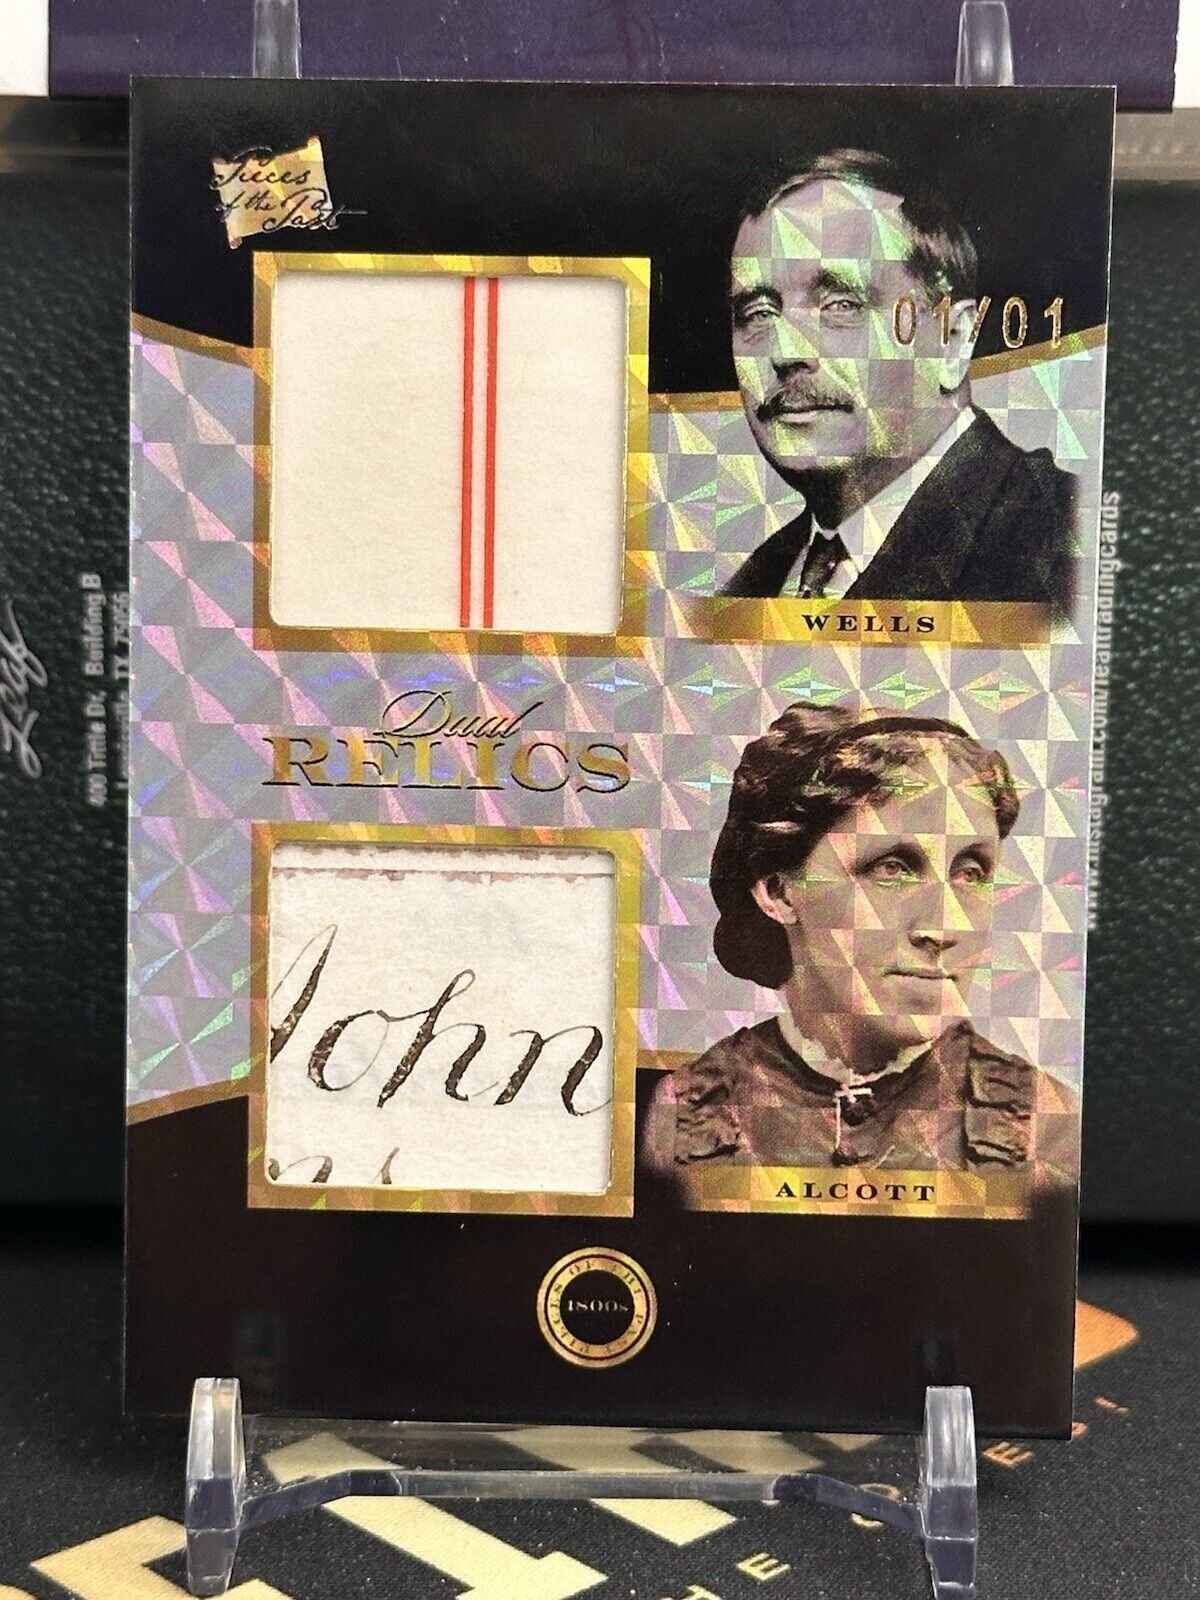 H.G. WELLS LOUISA ALCOTT PIECES OF THE PAST 1800\'s EDITION RELIC Gold Vinyl 1/1